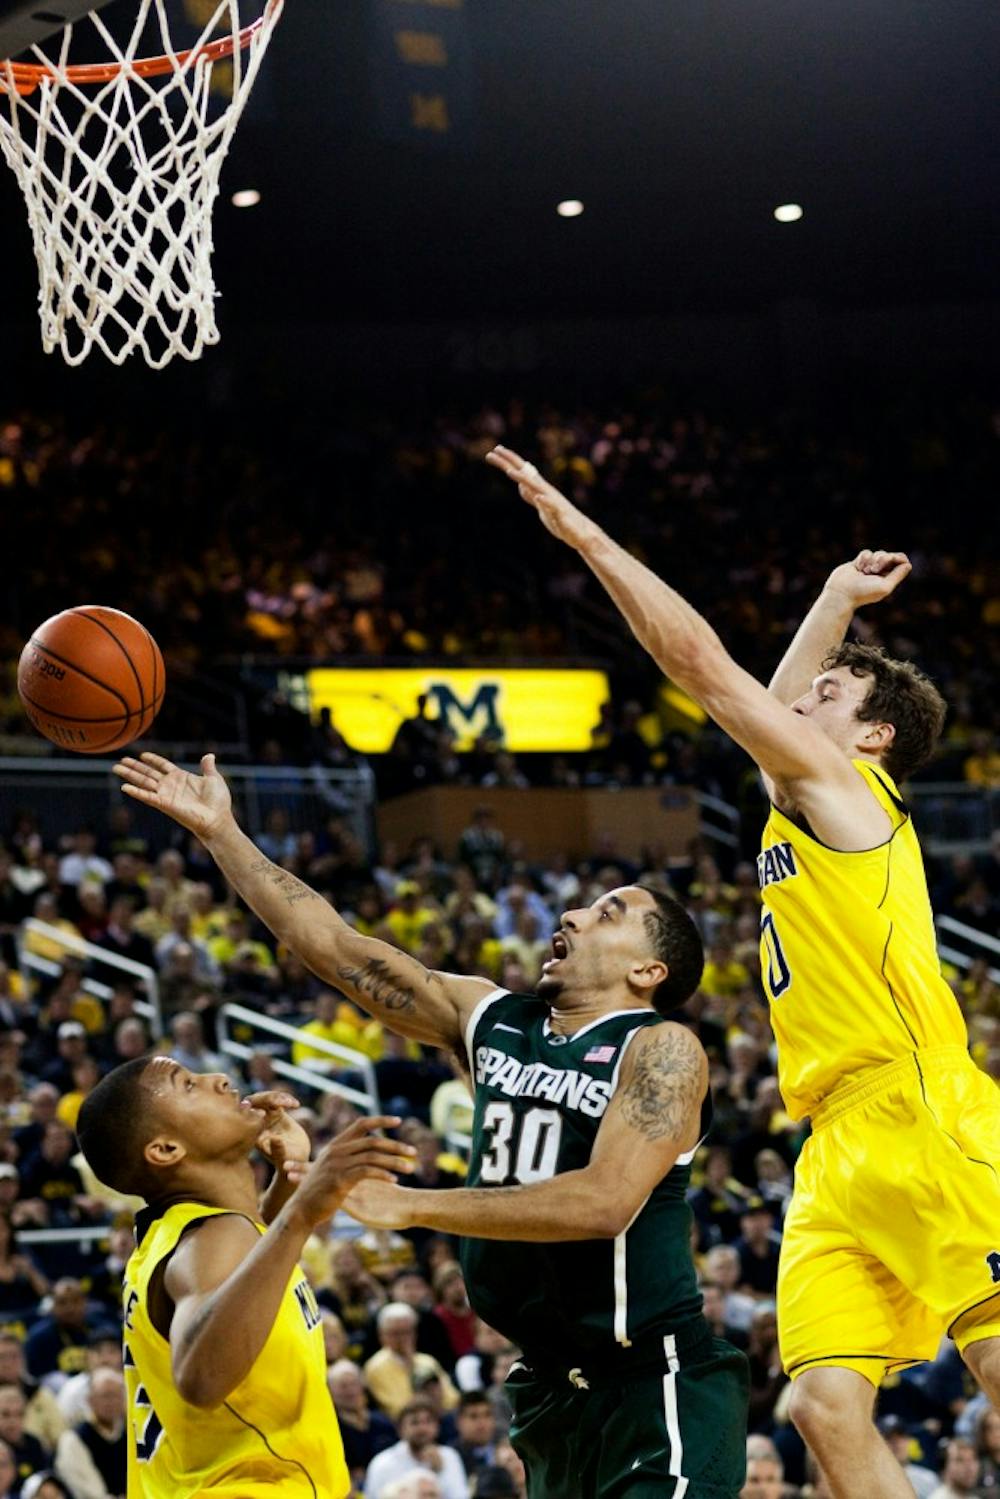 Redshirt senior guard Brandon Wood looks for a layup under heavy defensive pressure from Michigan guards Trey Burke and Zack Novak Tuesday night at Crisler Area. The Spartans fell to the Wolverines 59-60. Matt Hallowell/The State News